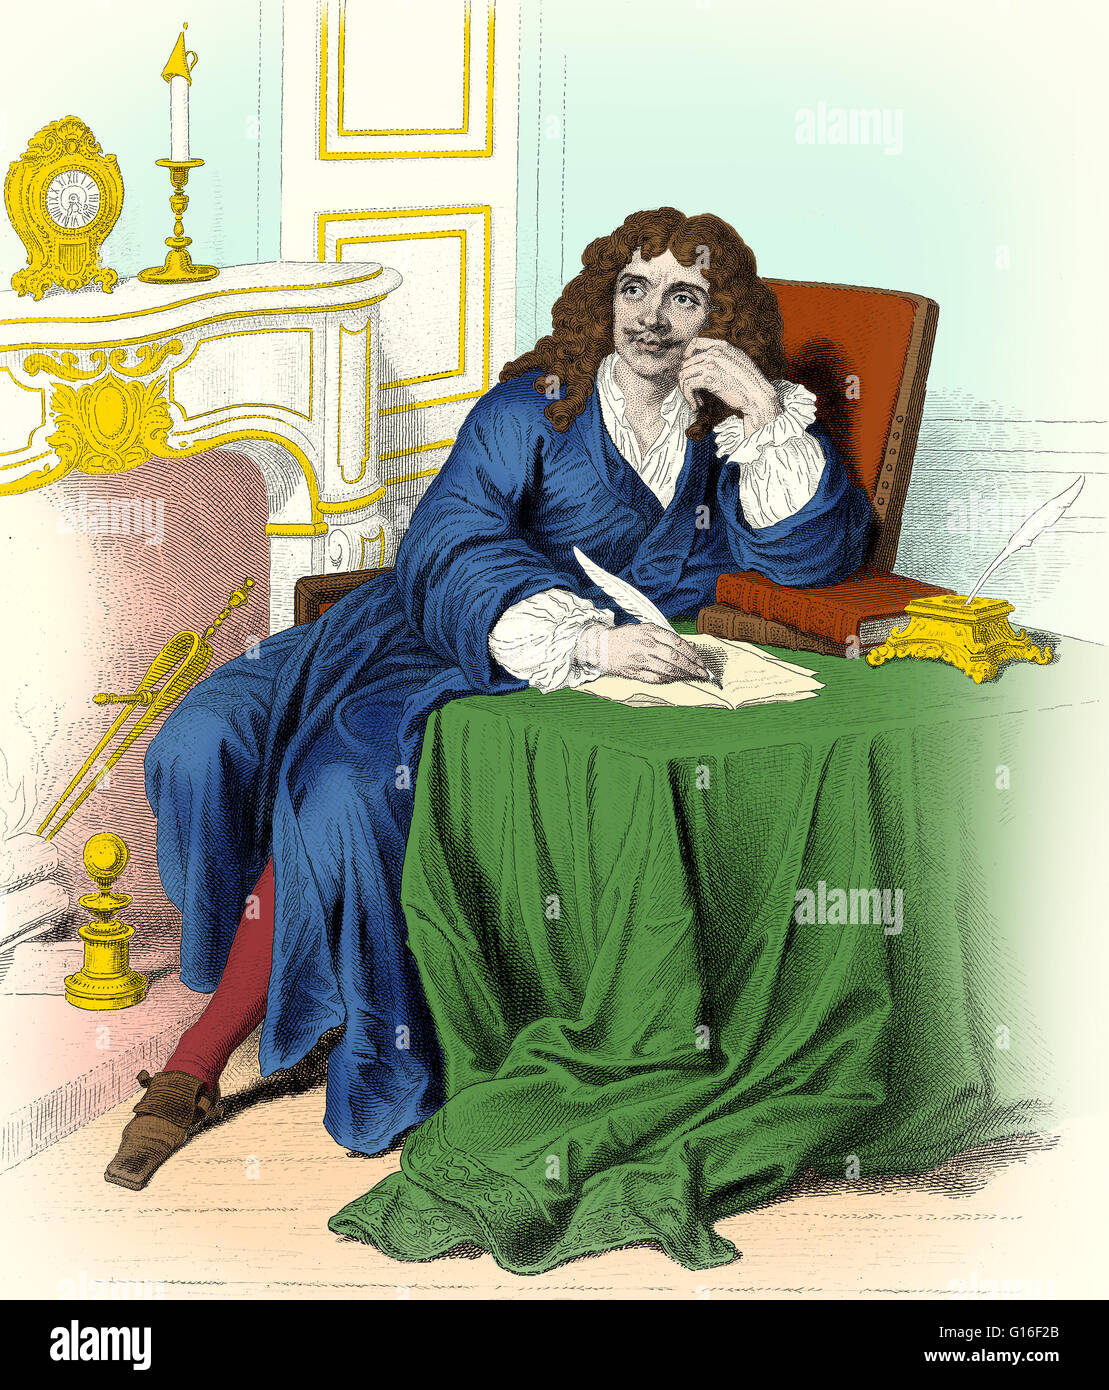 Molière, French Playwright and Actor Molière, French Playwright and Actor IMAGE NUMBER: JC4086 LICENSE: RIGHTS MANAGED Jean-Baptiste Poquelin, known by his stage name Molière (January 15,1622 - February 17,1673) was a French